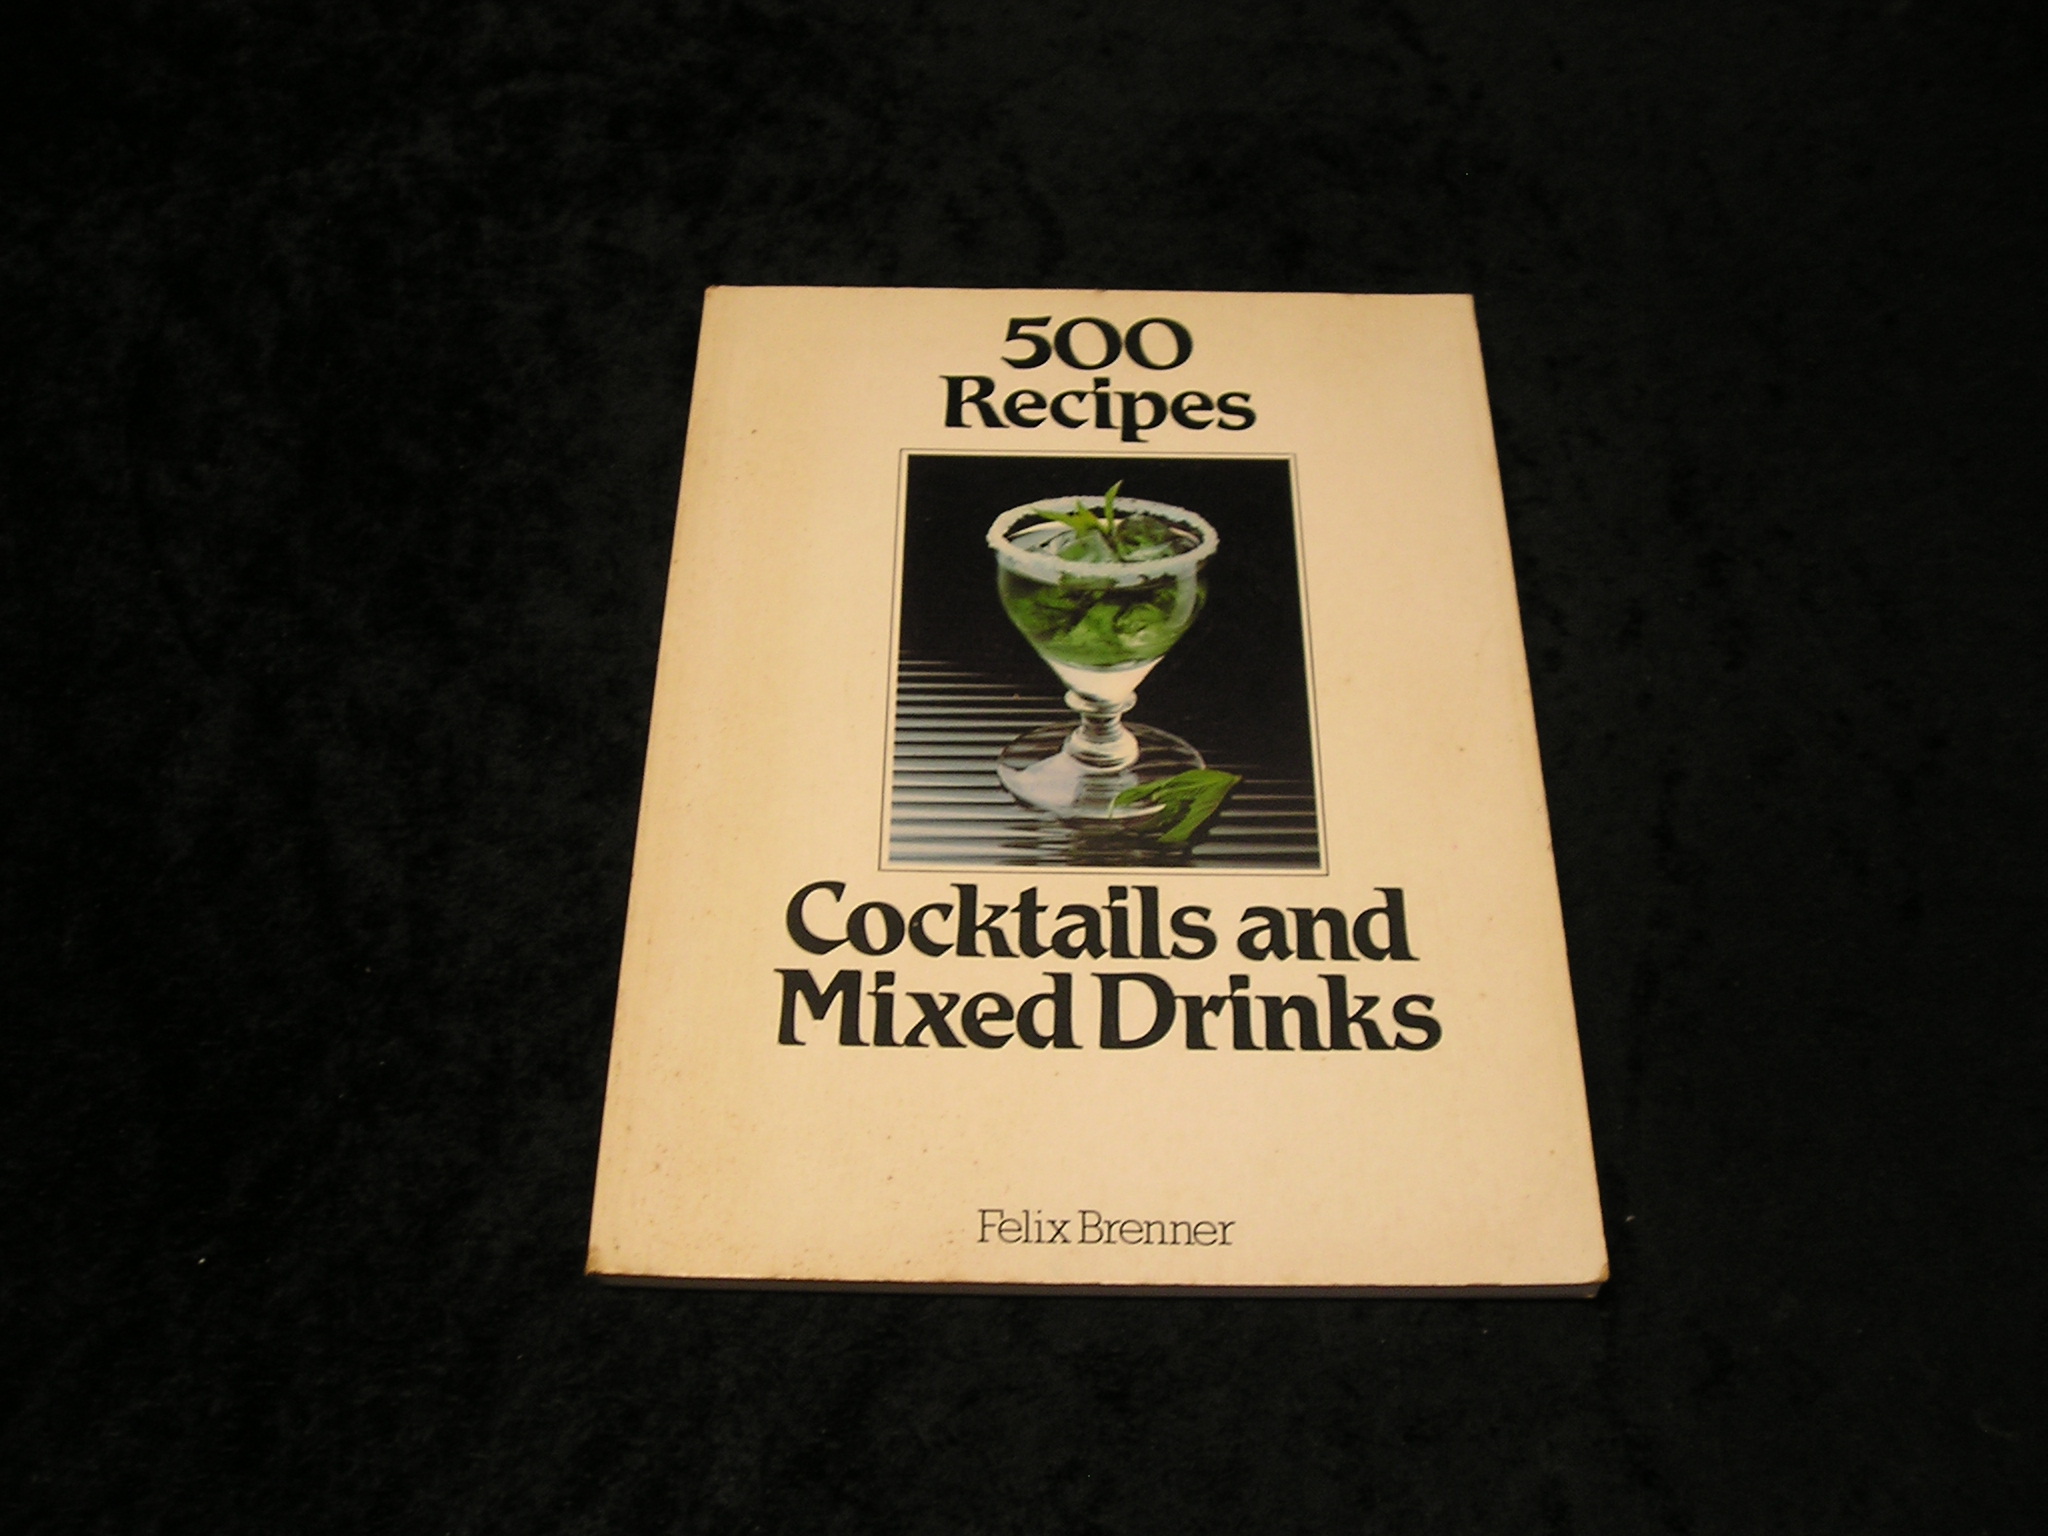 500 recipes Cocktails and Mixed Drinks